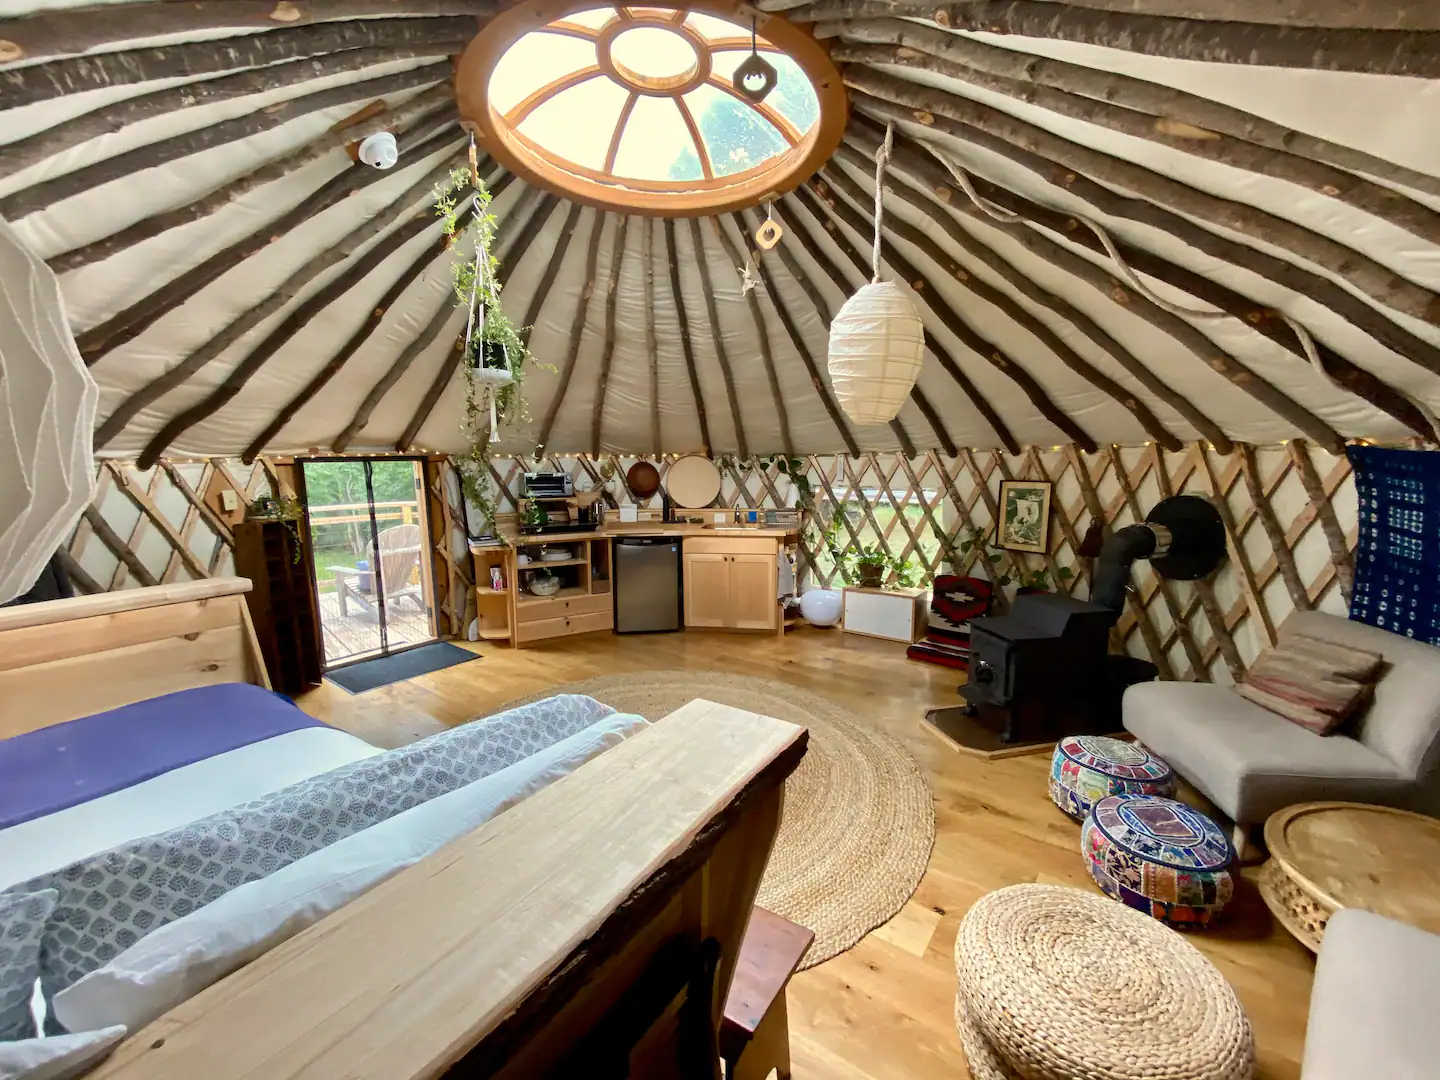 Pristine and Luxe Yurt Glamping — Surrounded by nature